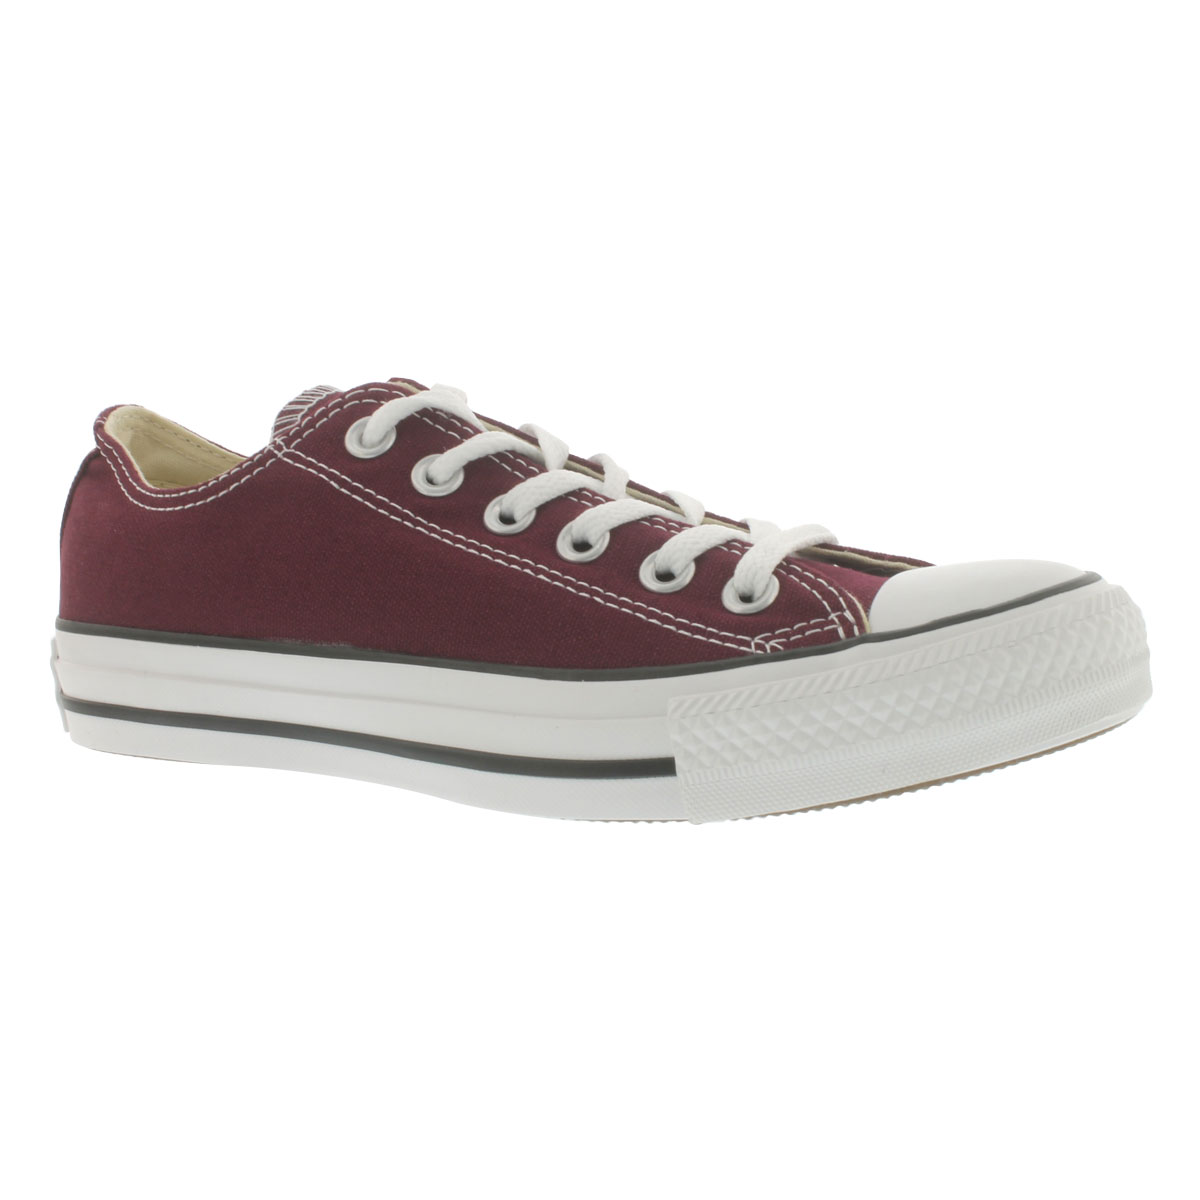 Converse Women's CHUCK TAYLOR ALL STAR burgundy sneakers